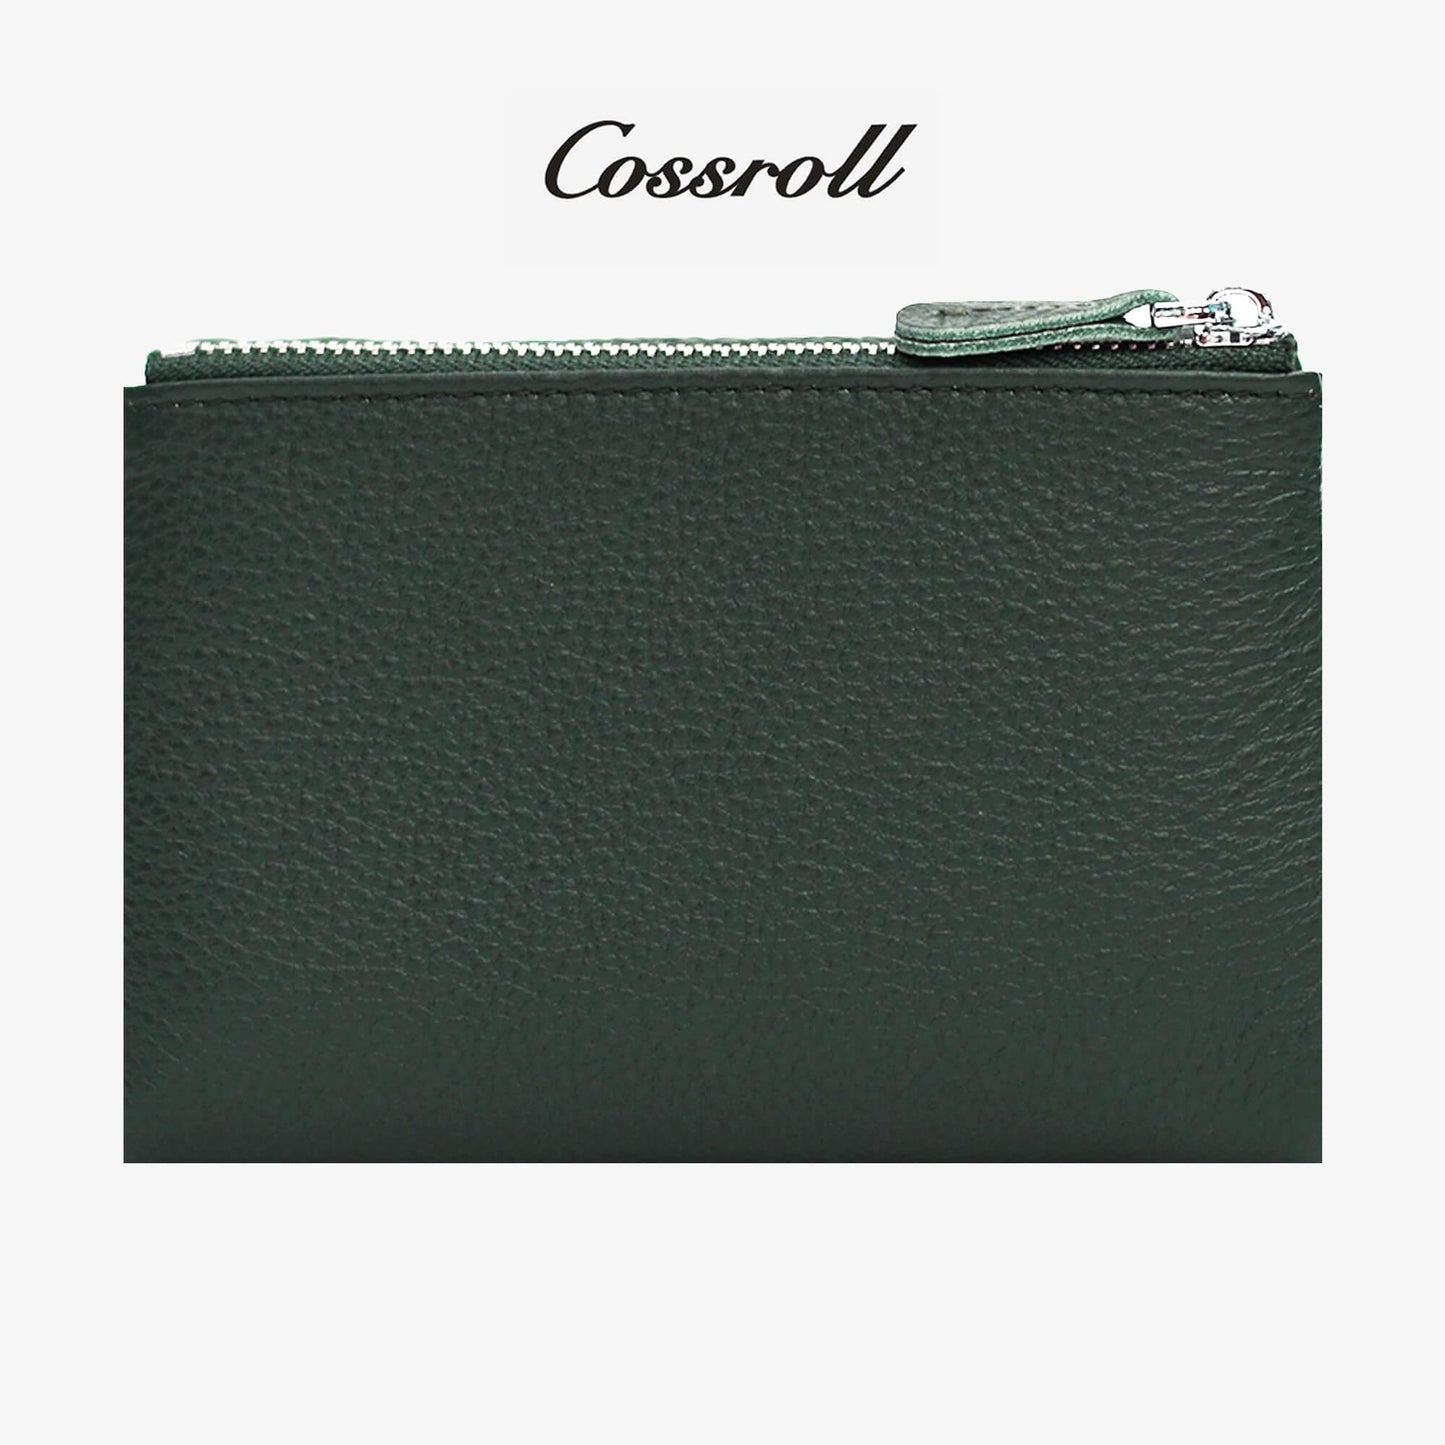 Leather Clutch Wallets Wholesale Manufactuer Cossroll